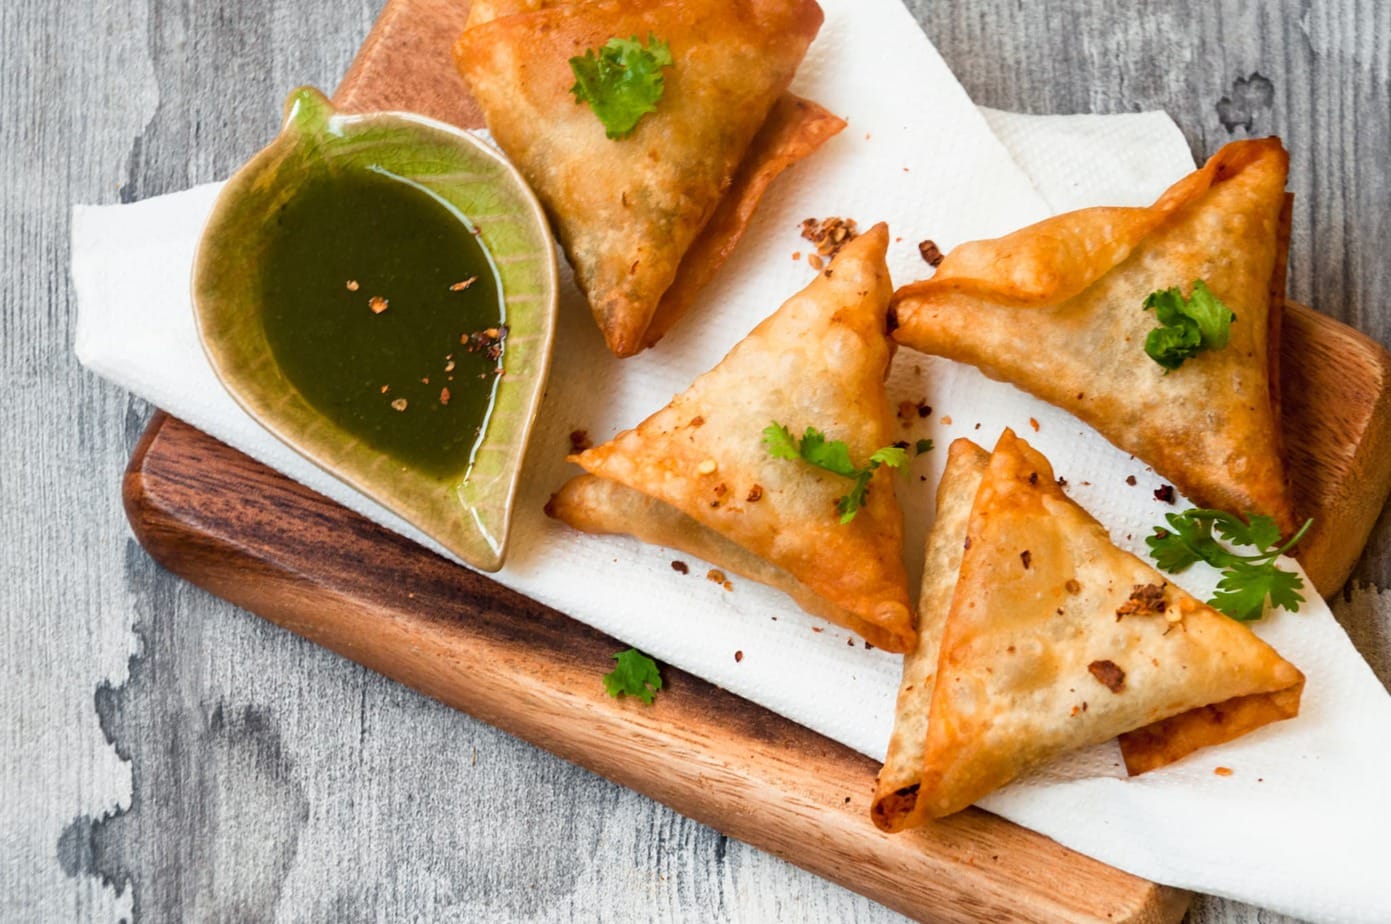 Fried Beef samosa served on tissue with cilantro leaves garnish.